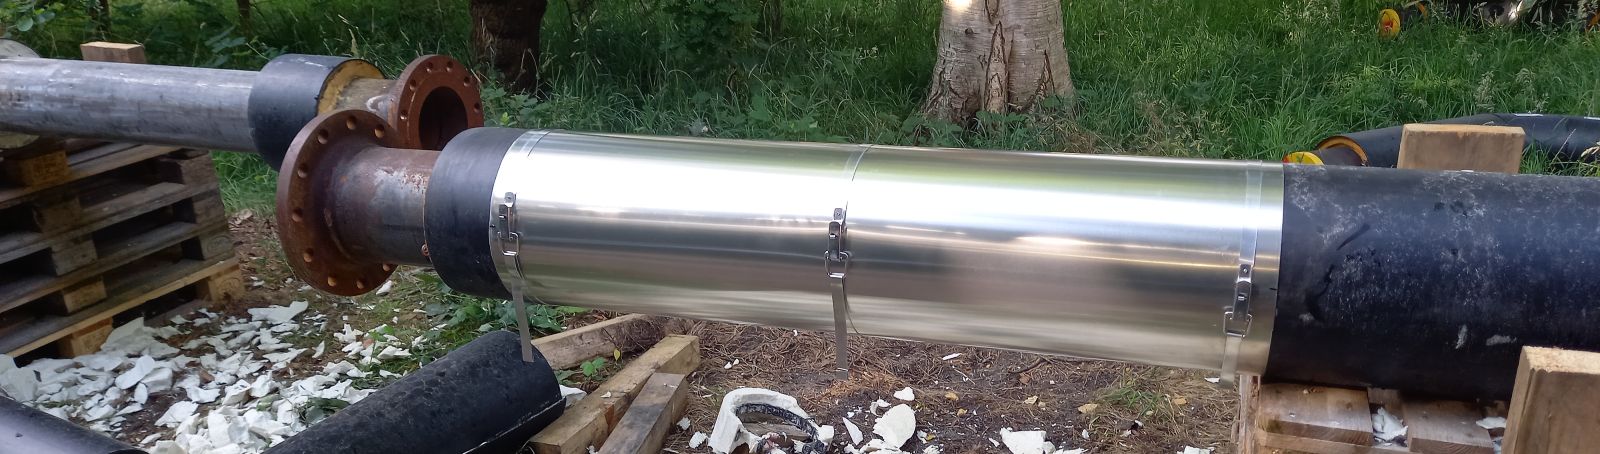 Here you can see a partial segment of the test track encased in a mudguard on which the newly developed tube liners were tested.